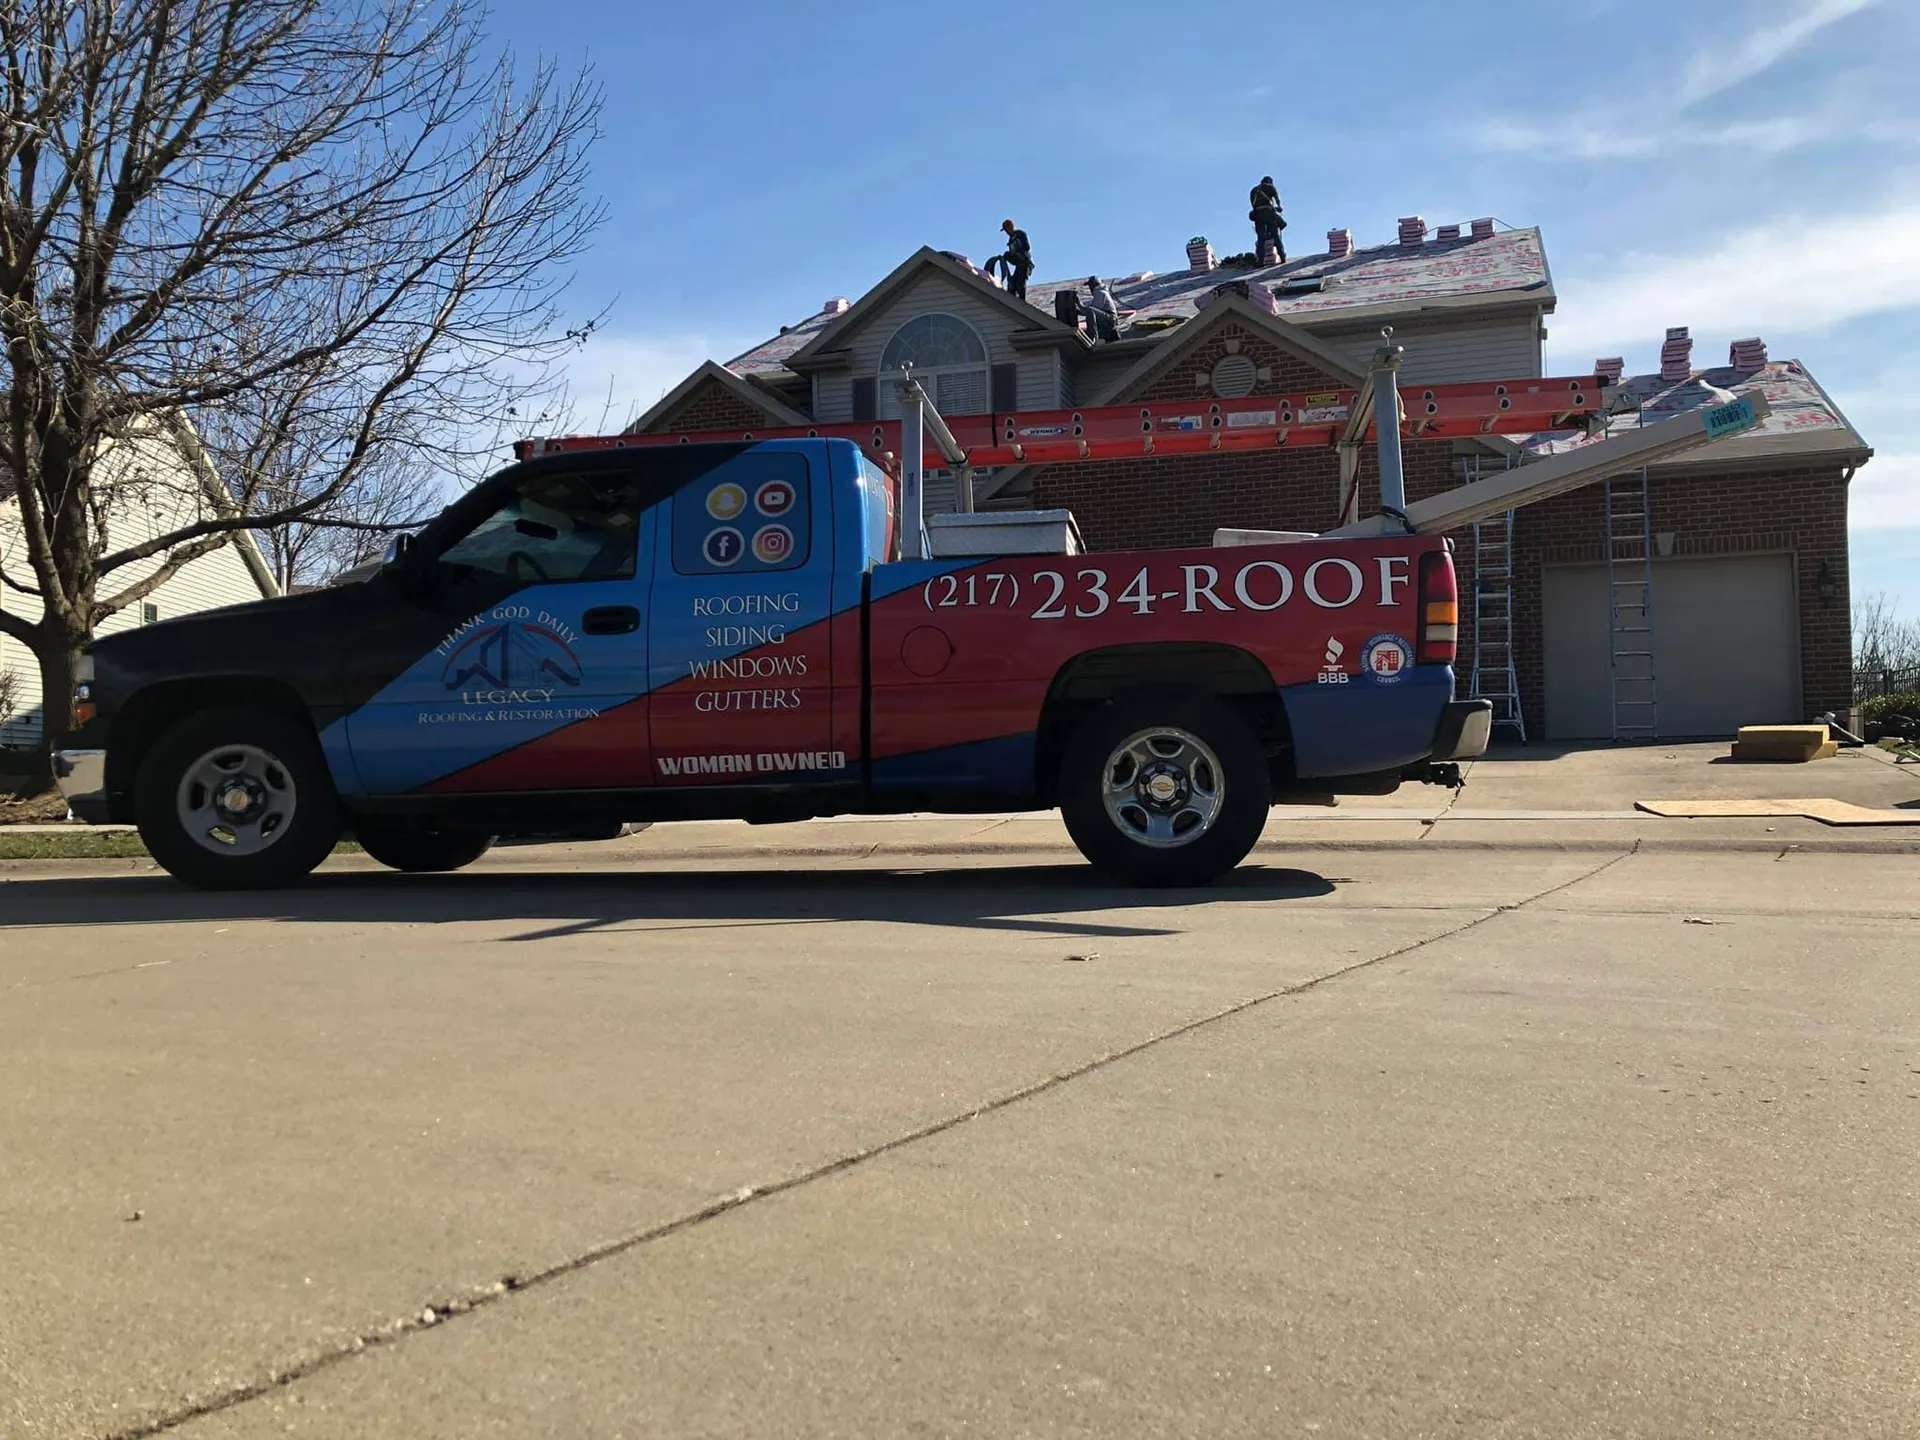 Legacy Roofing service truck